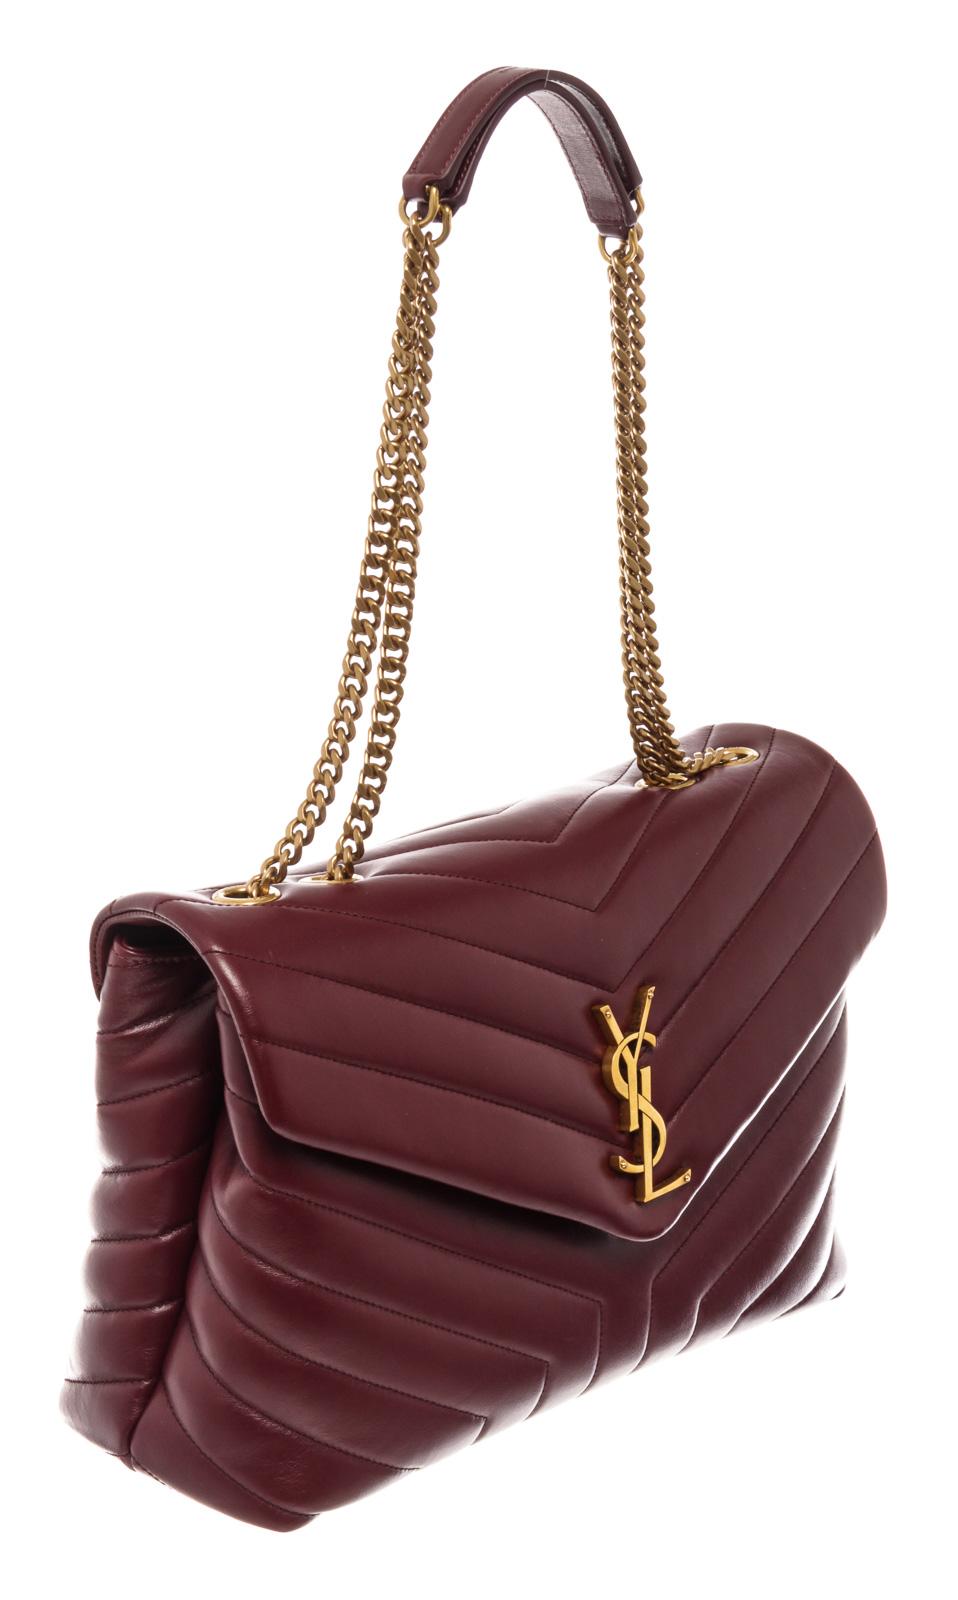 Burgundy leather with Chevron quilt detail Saint Laurent Loulou medium shoulder bag with gold-tone hardware, signature YSL monogram at front, chain-link shoulder straps with leather pads, black canvas lining & single interior pocket with zipper and